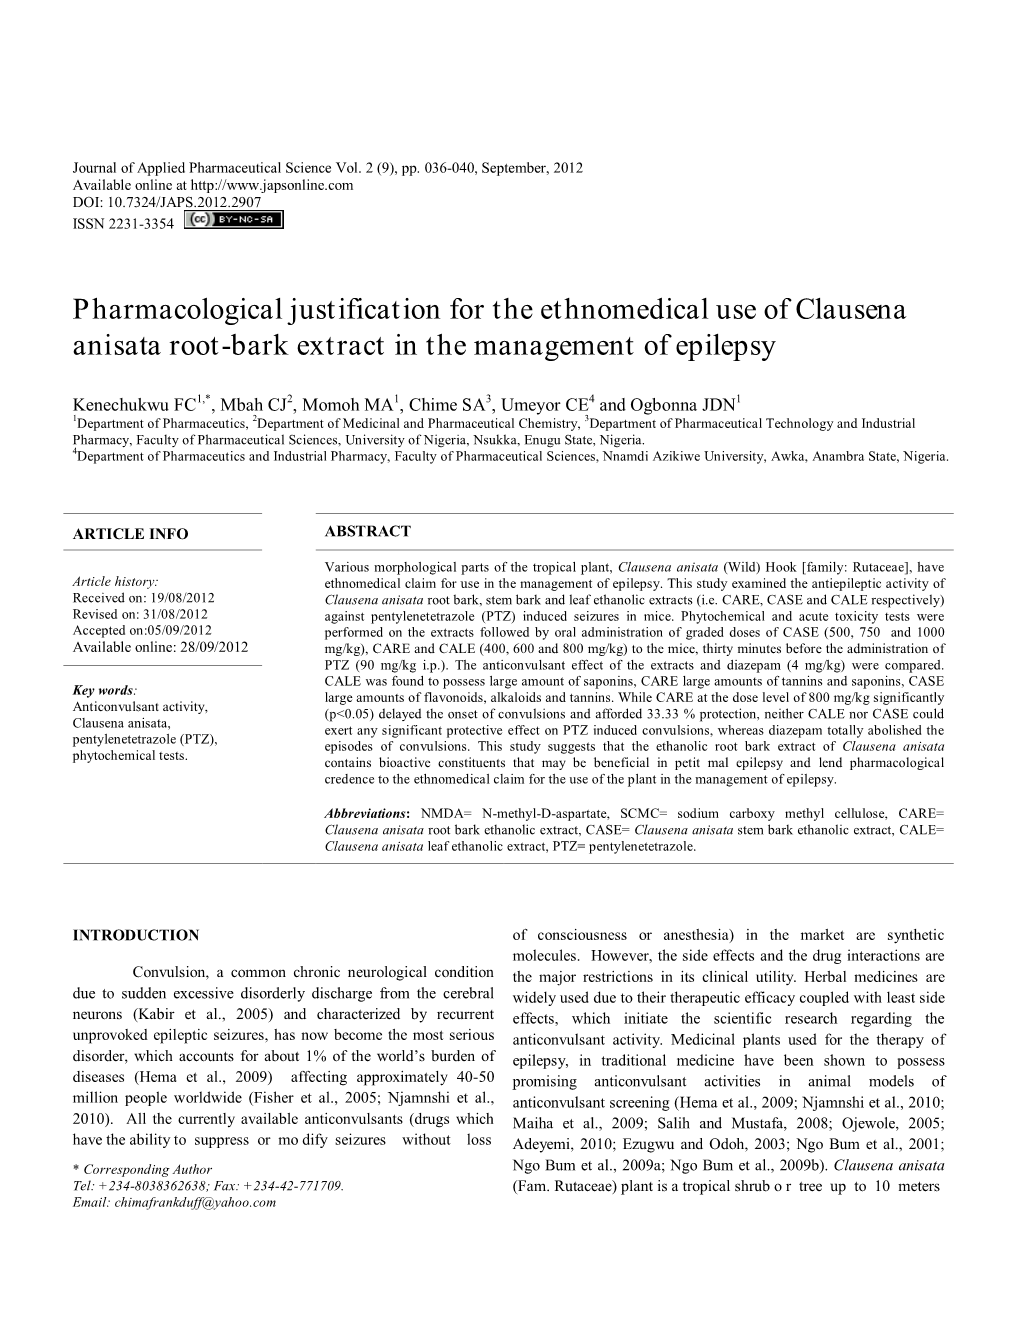 Clausena Anisata Root-Bark Extract in the Management of Epilepsy